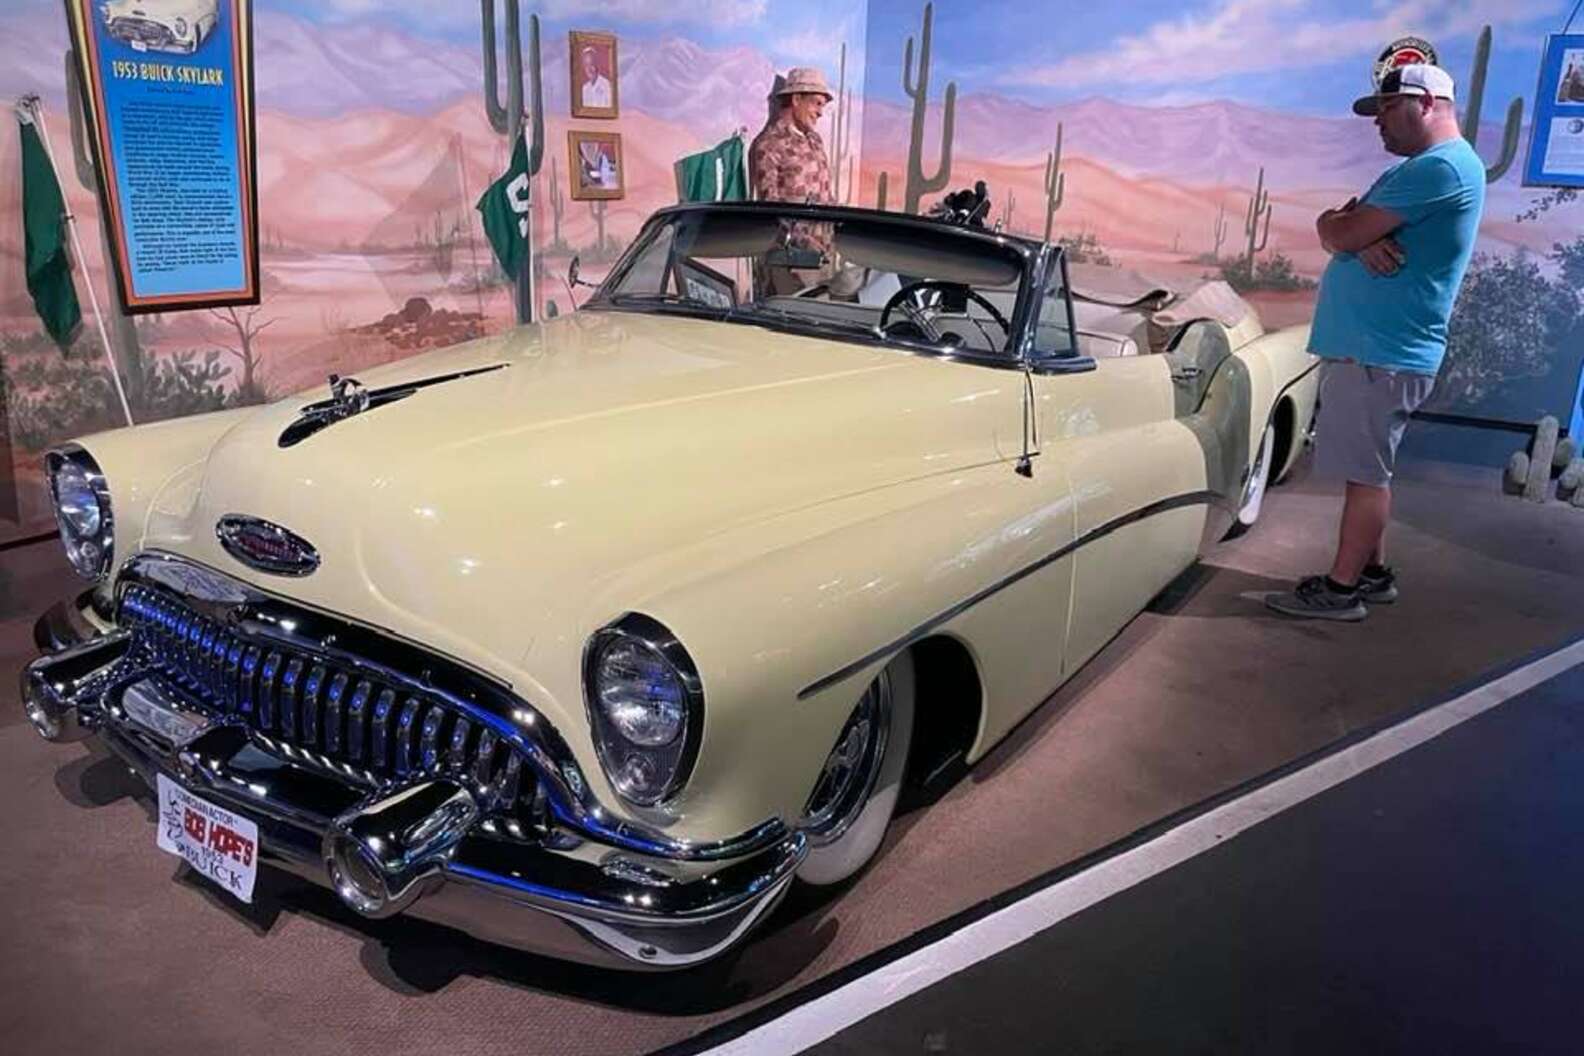 Courtesy of Hollywood Star Car Museum